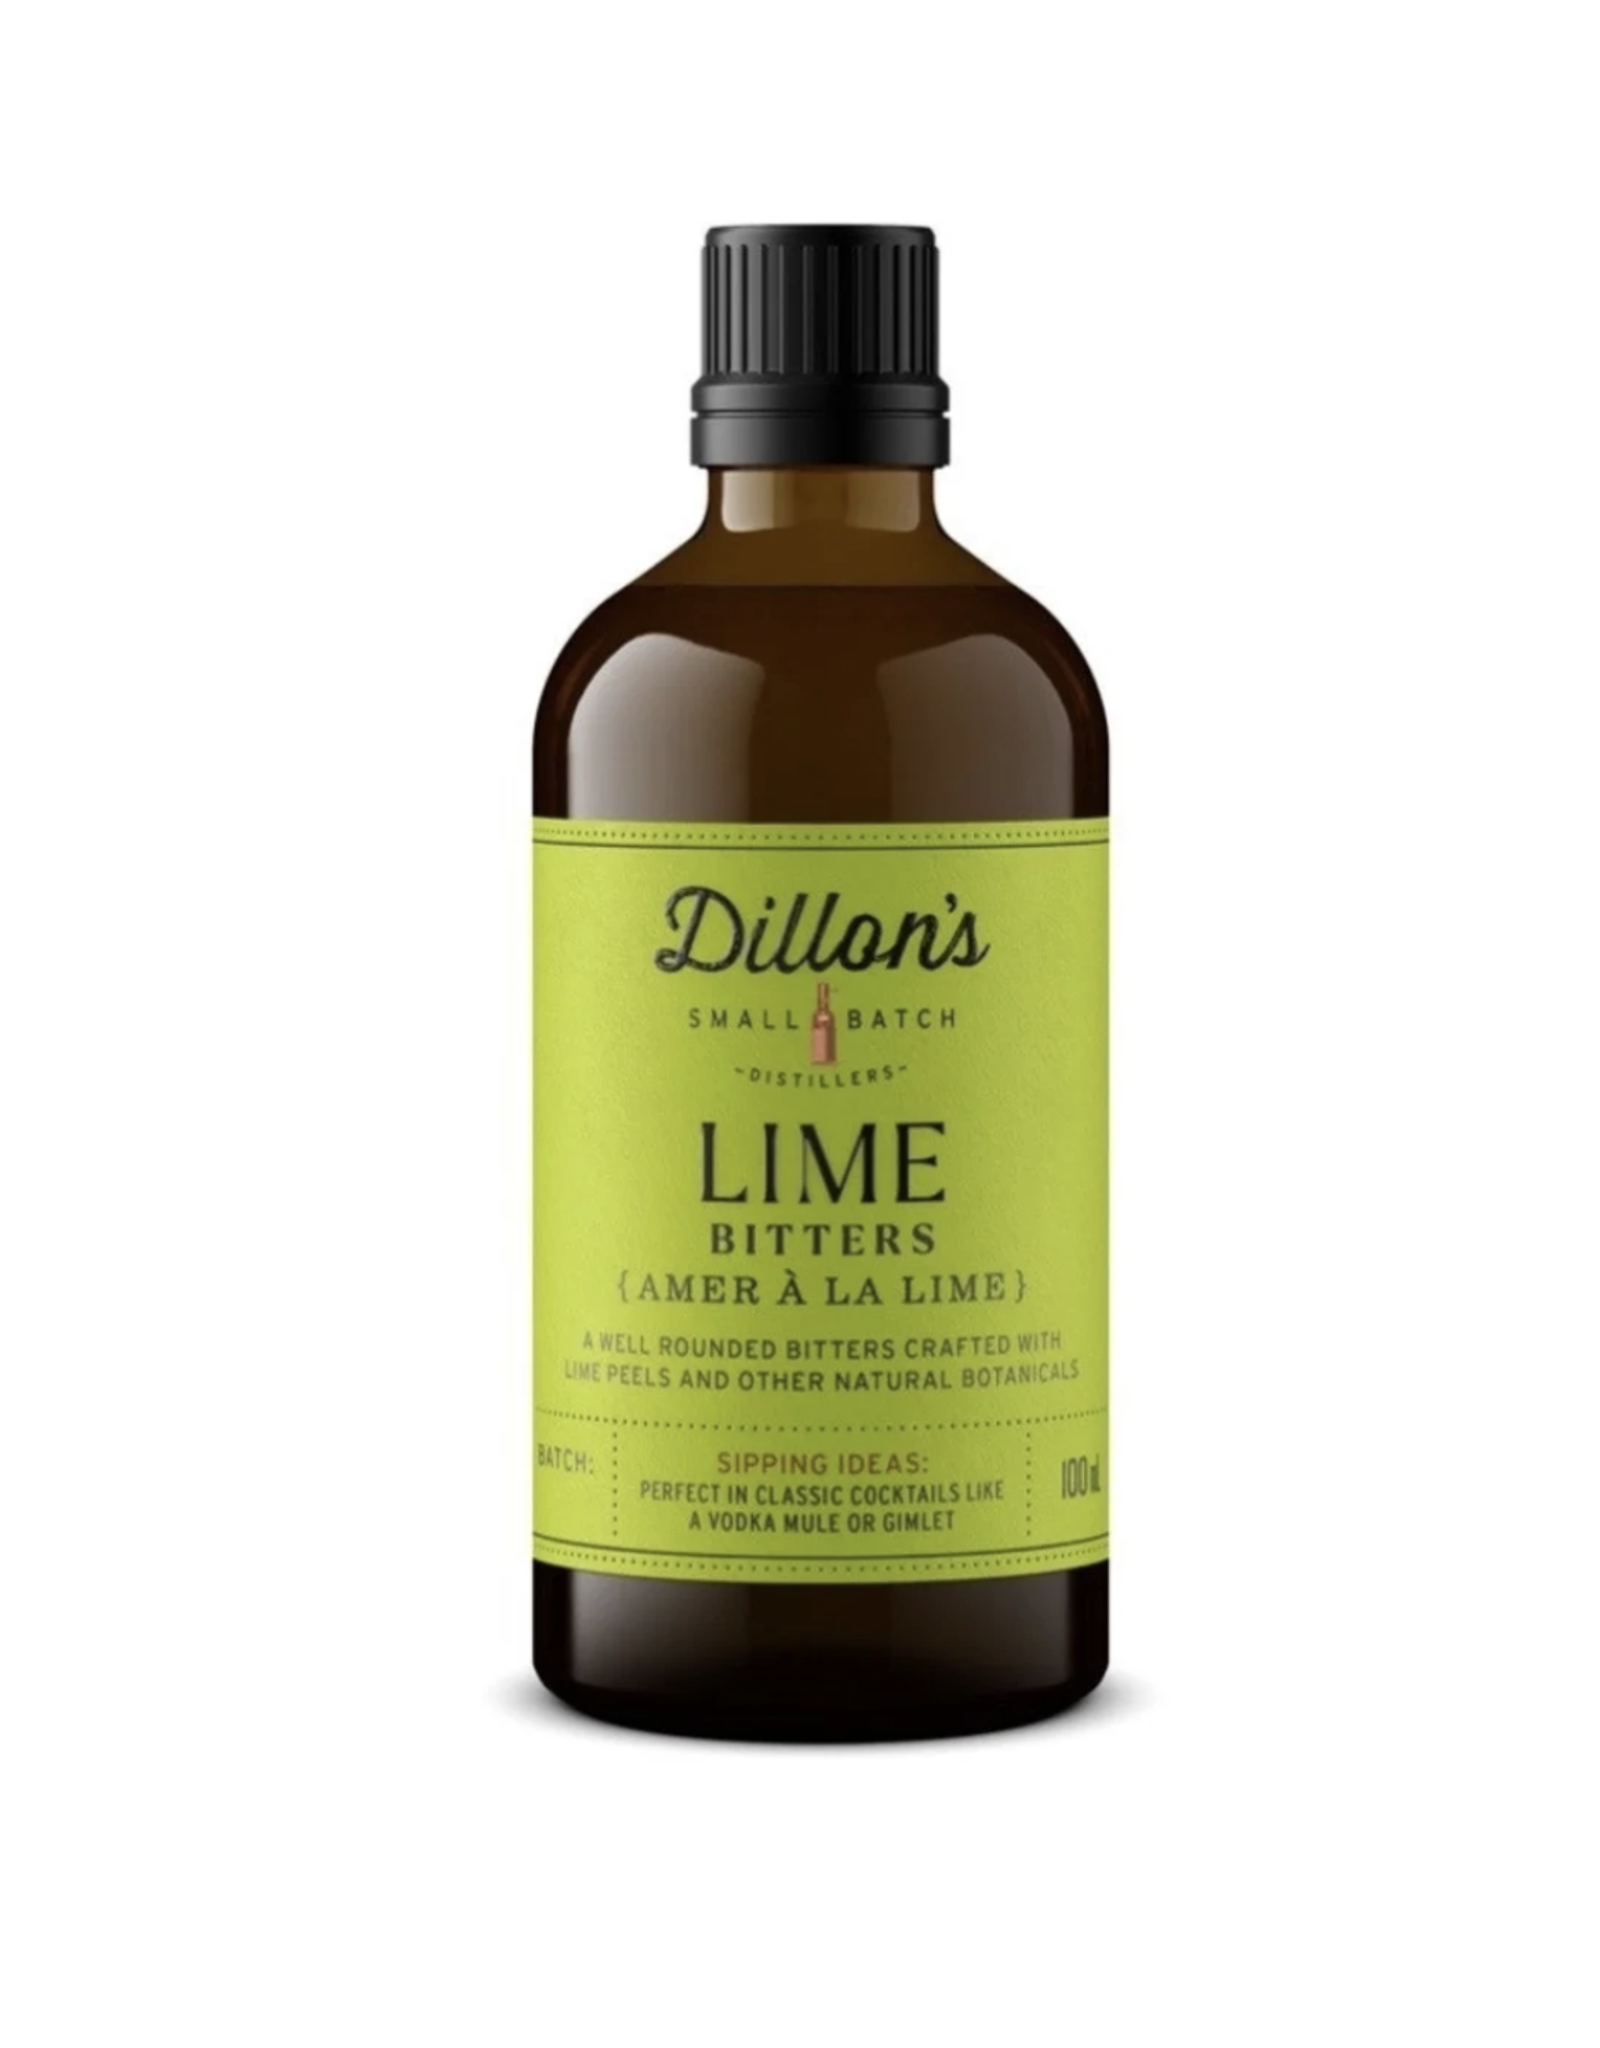 Lime Bitters